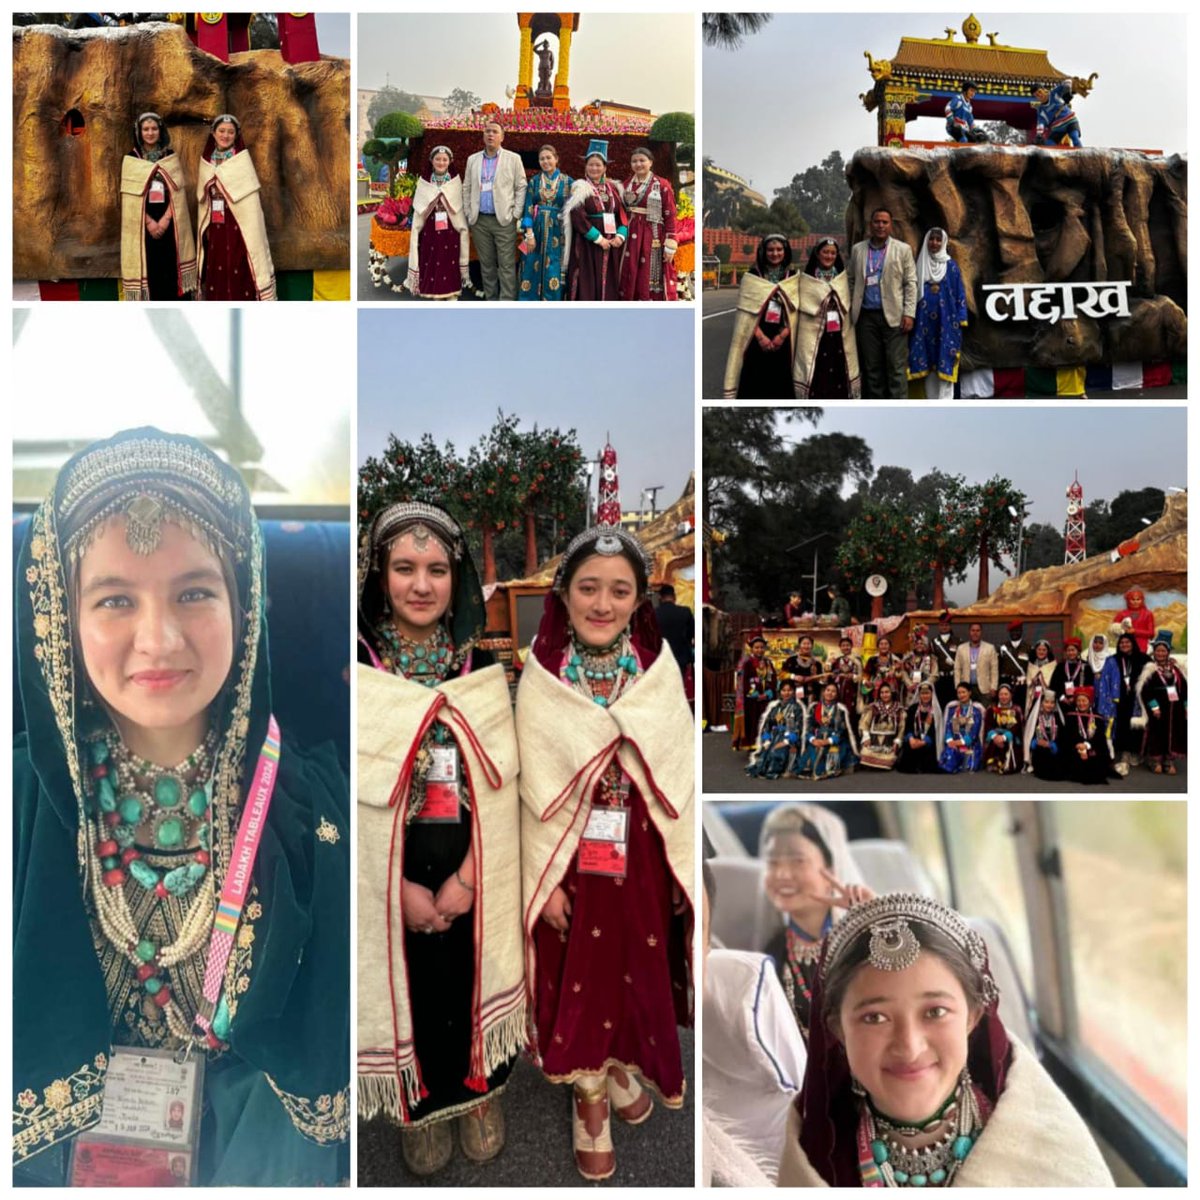 It's a significant milestone for Baltiyul and community, as a Balti's girl from Chulunkha and Tyakshi participated Ladakh tabalu during the Republic celebration in Delhi 2024, showcasing Balti culture on a national platform. A proud moment indeed!